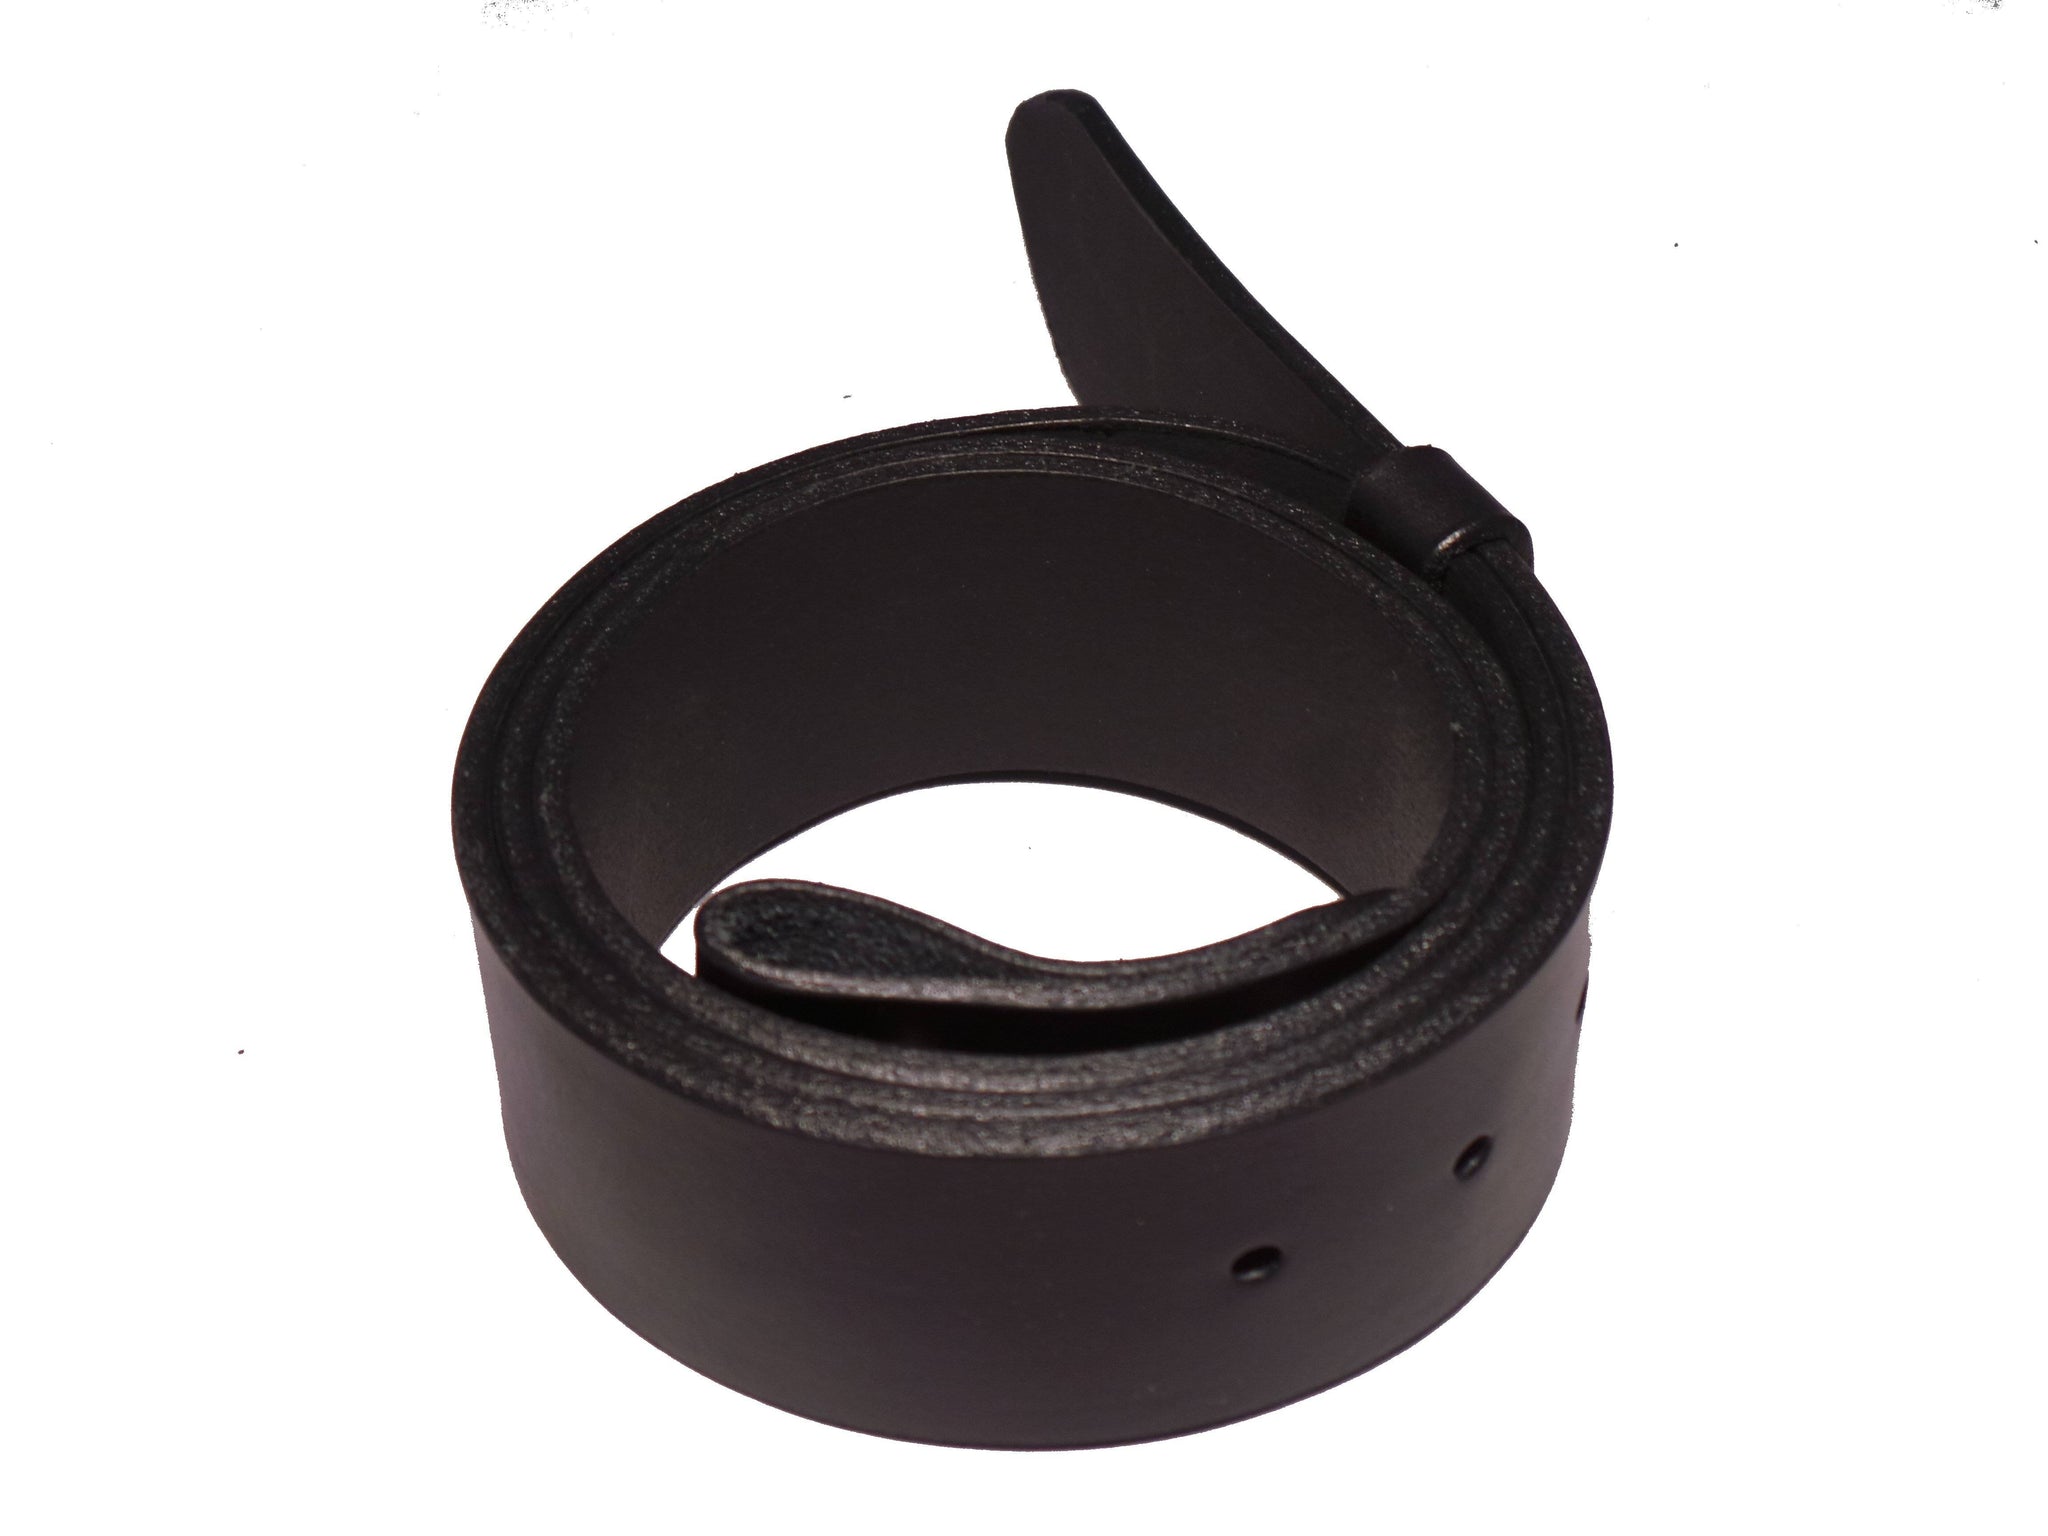 Real Black 1 3/4 Inch 45mm Wide Leather Belt Strap Made in the UK – BuckleMyBelt